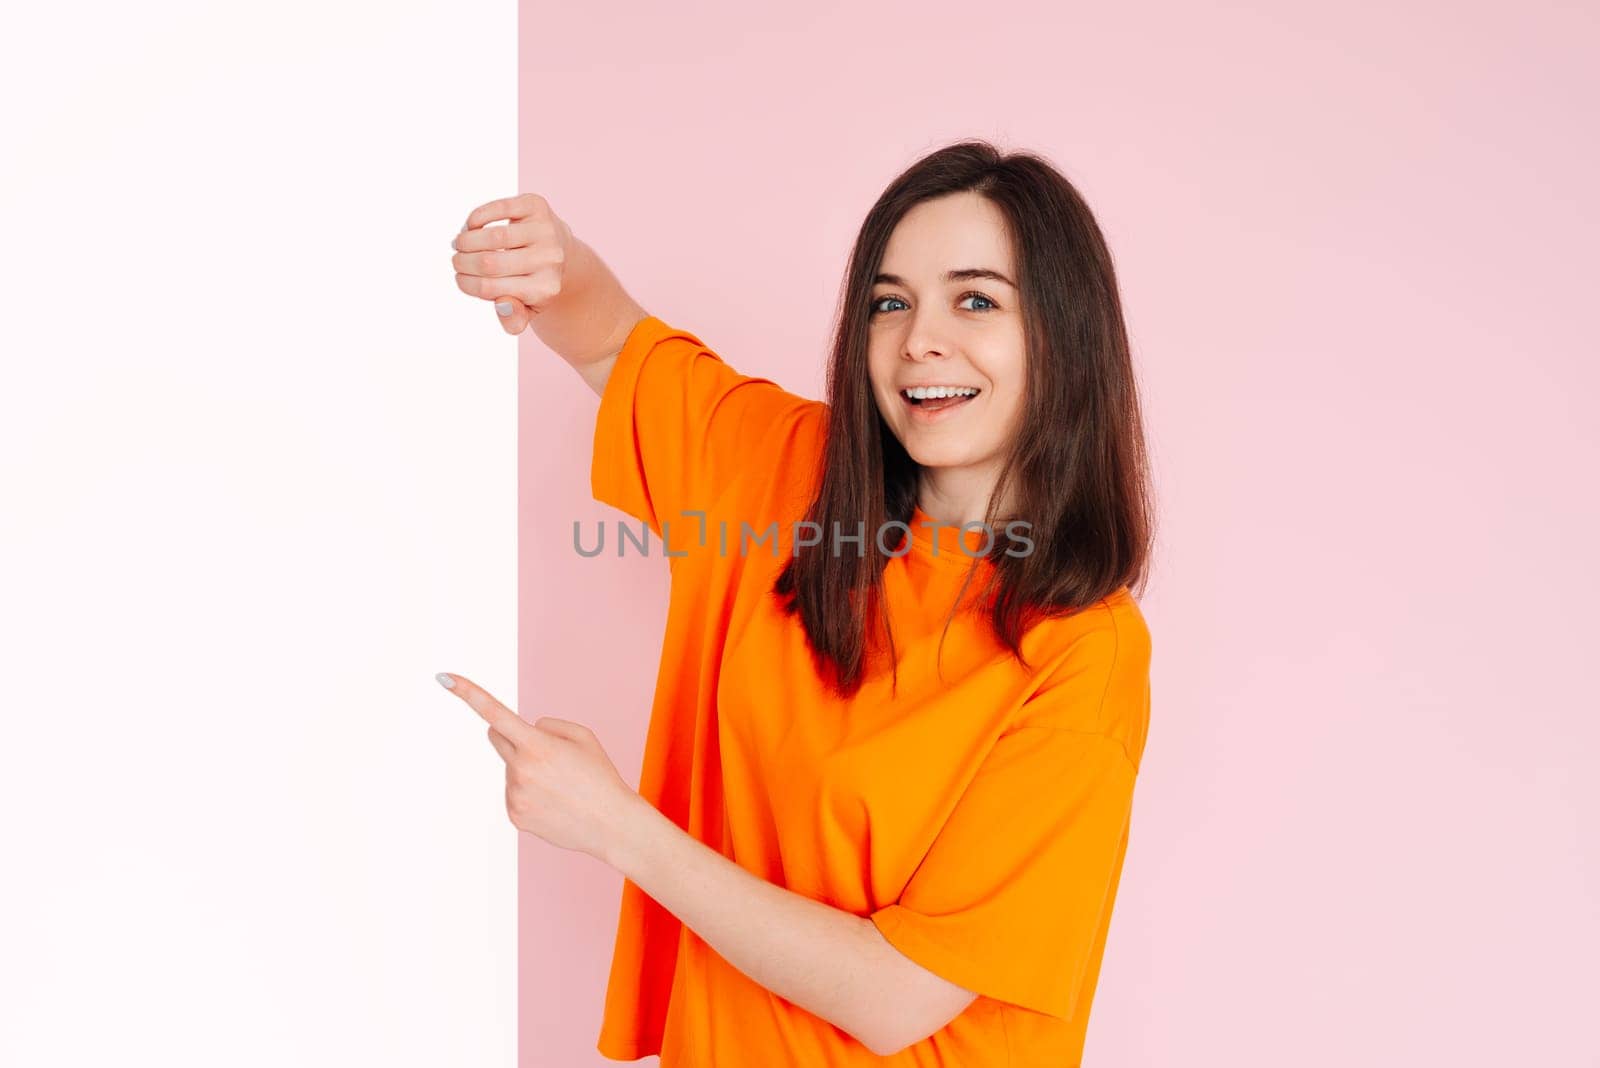 Bargain Hunter: Optimistic Girl Holding Paper Board with Empty Space - Affordable Prices Presentation for Advertising, Isolated on Pink Background